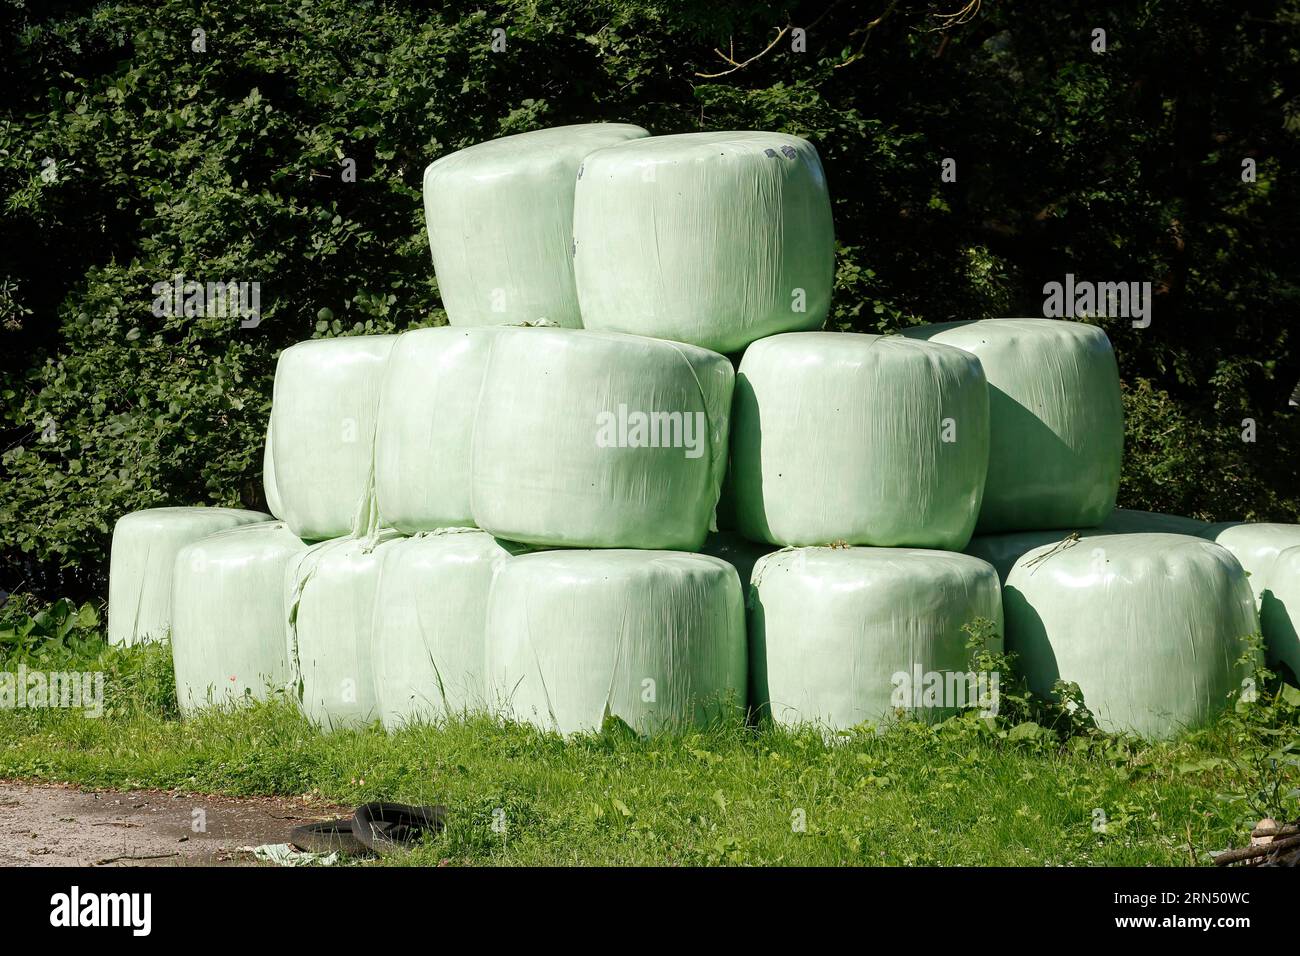 Grass silage packed with green plastic sheeting, hay, Lower Saxony, Germany Stock Photo